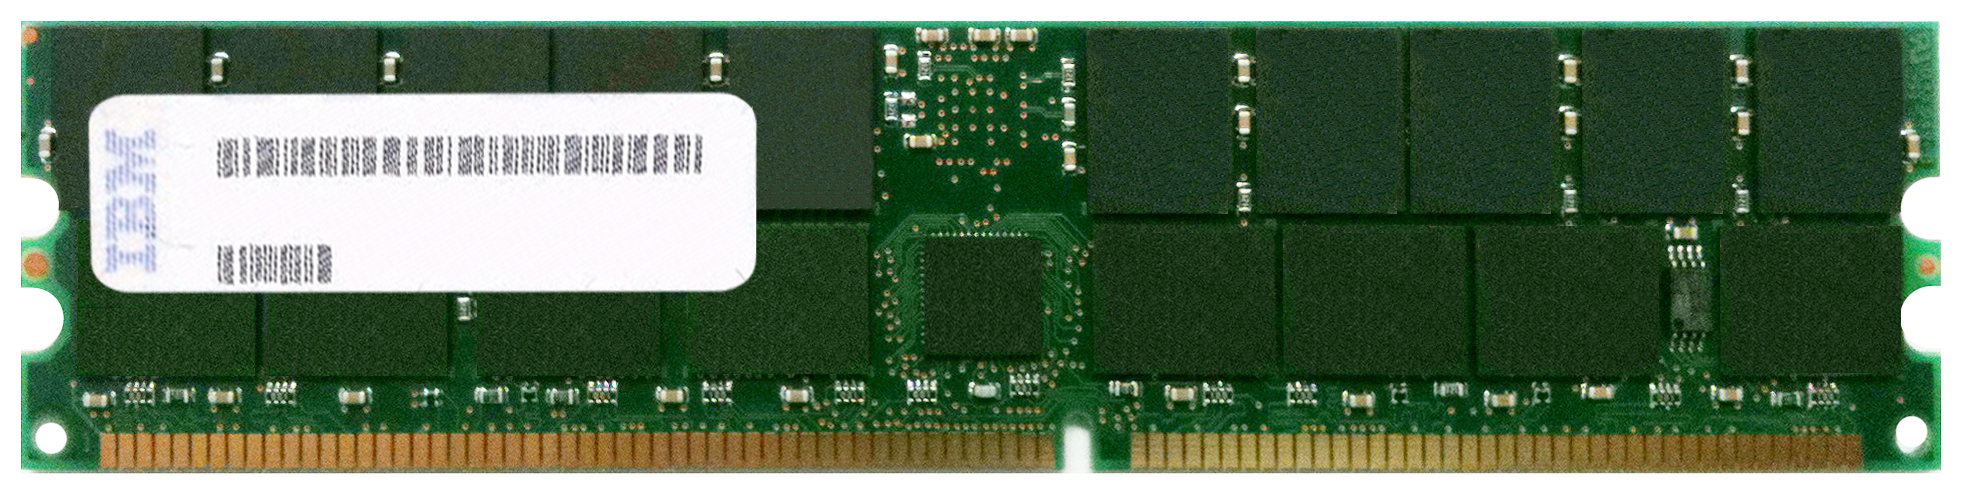 39M5868 IBM 4GB PC2-5300 DDR2-667MHz ECC Registered CL5 240-Pin DIMM Very Low Profile (VLP) Memory Module for BladeCenter LS41